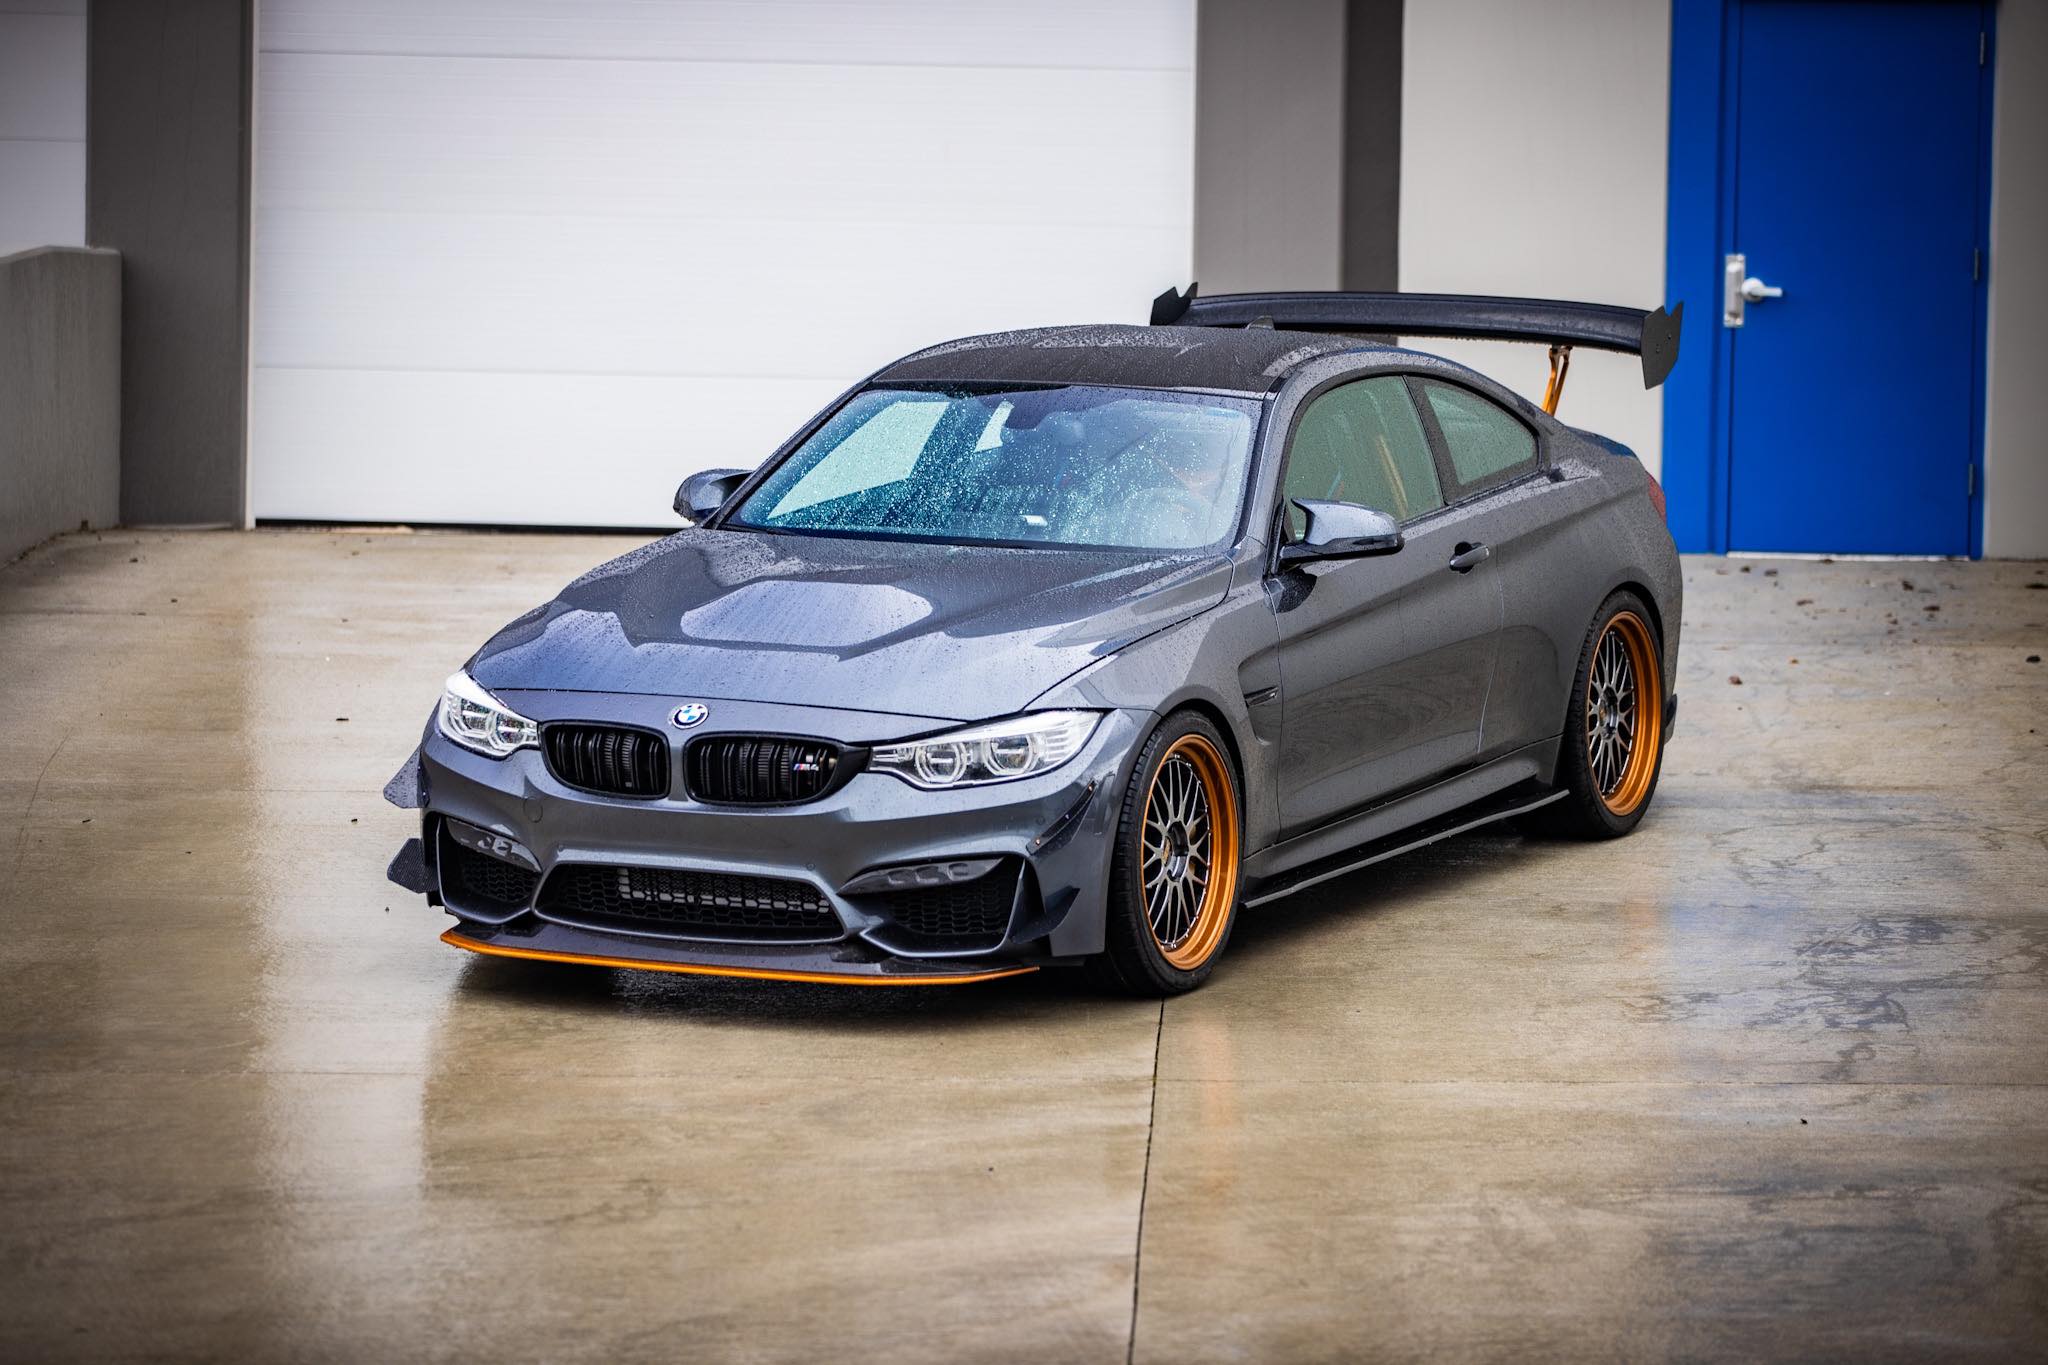 F8X, M4 GTS, BBS LM, Carbon Fiber, Performance Parts, Front Lip, Wing, Spoiler, Canards